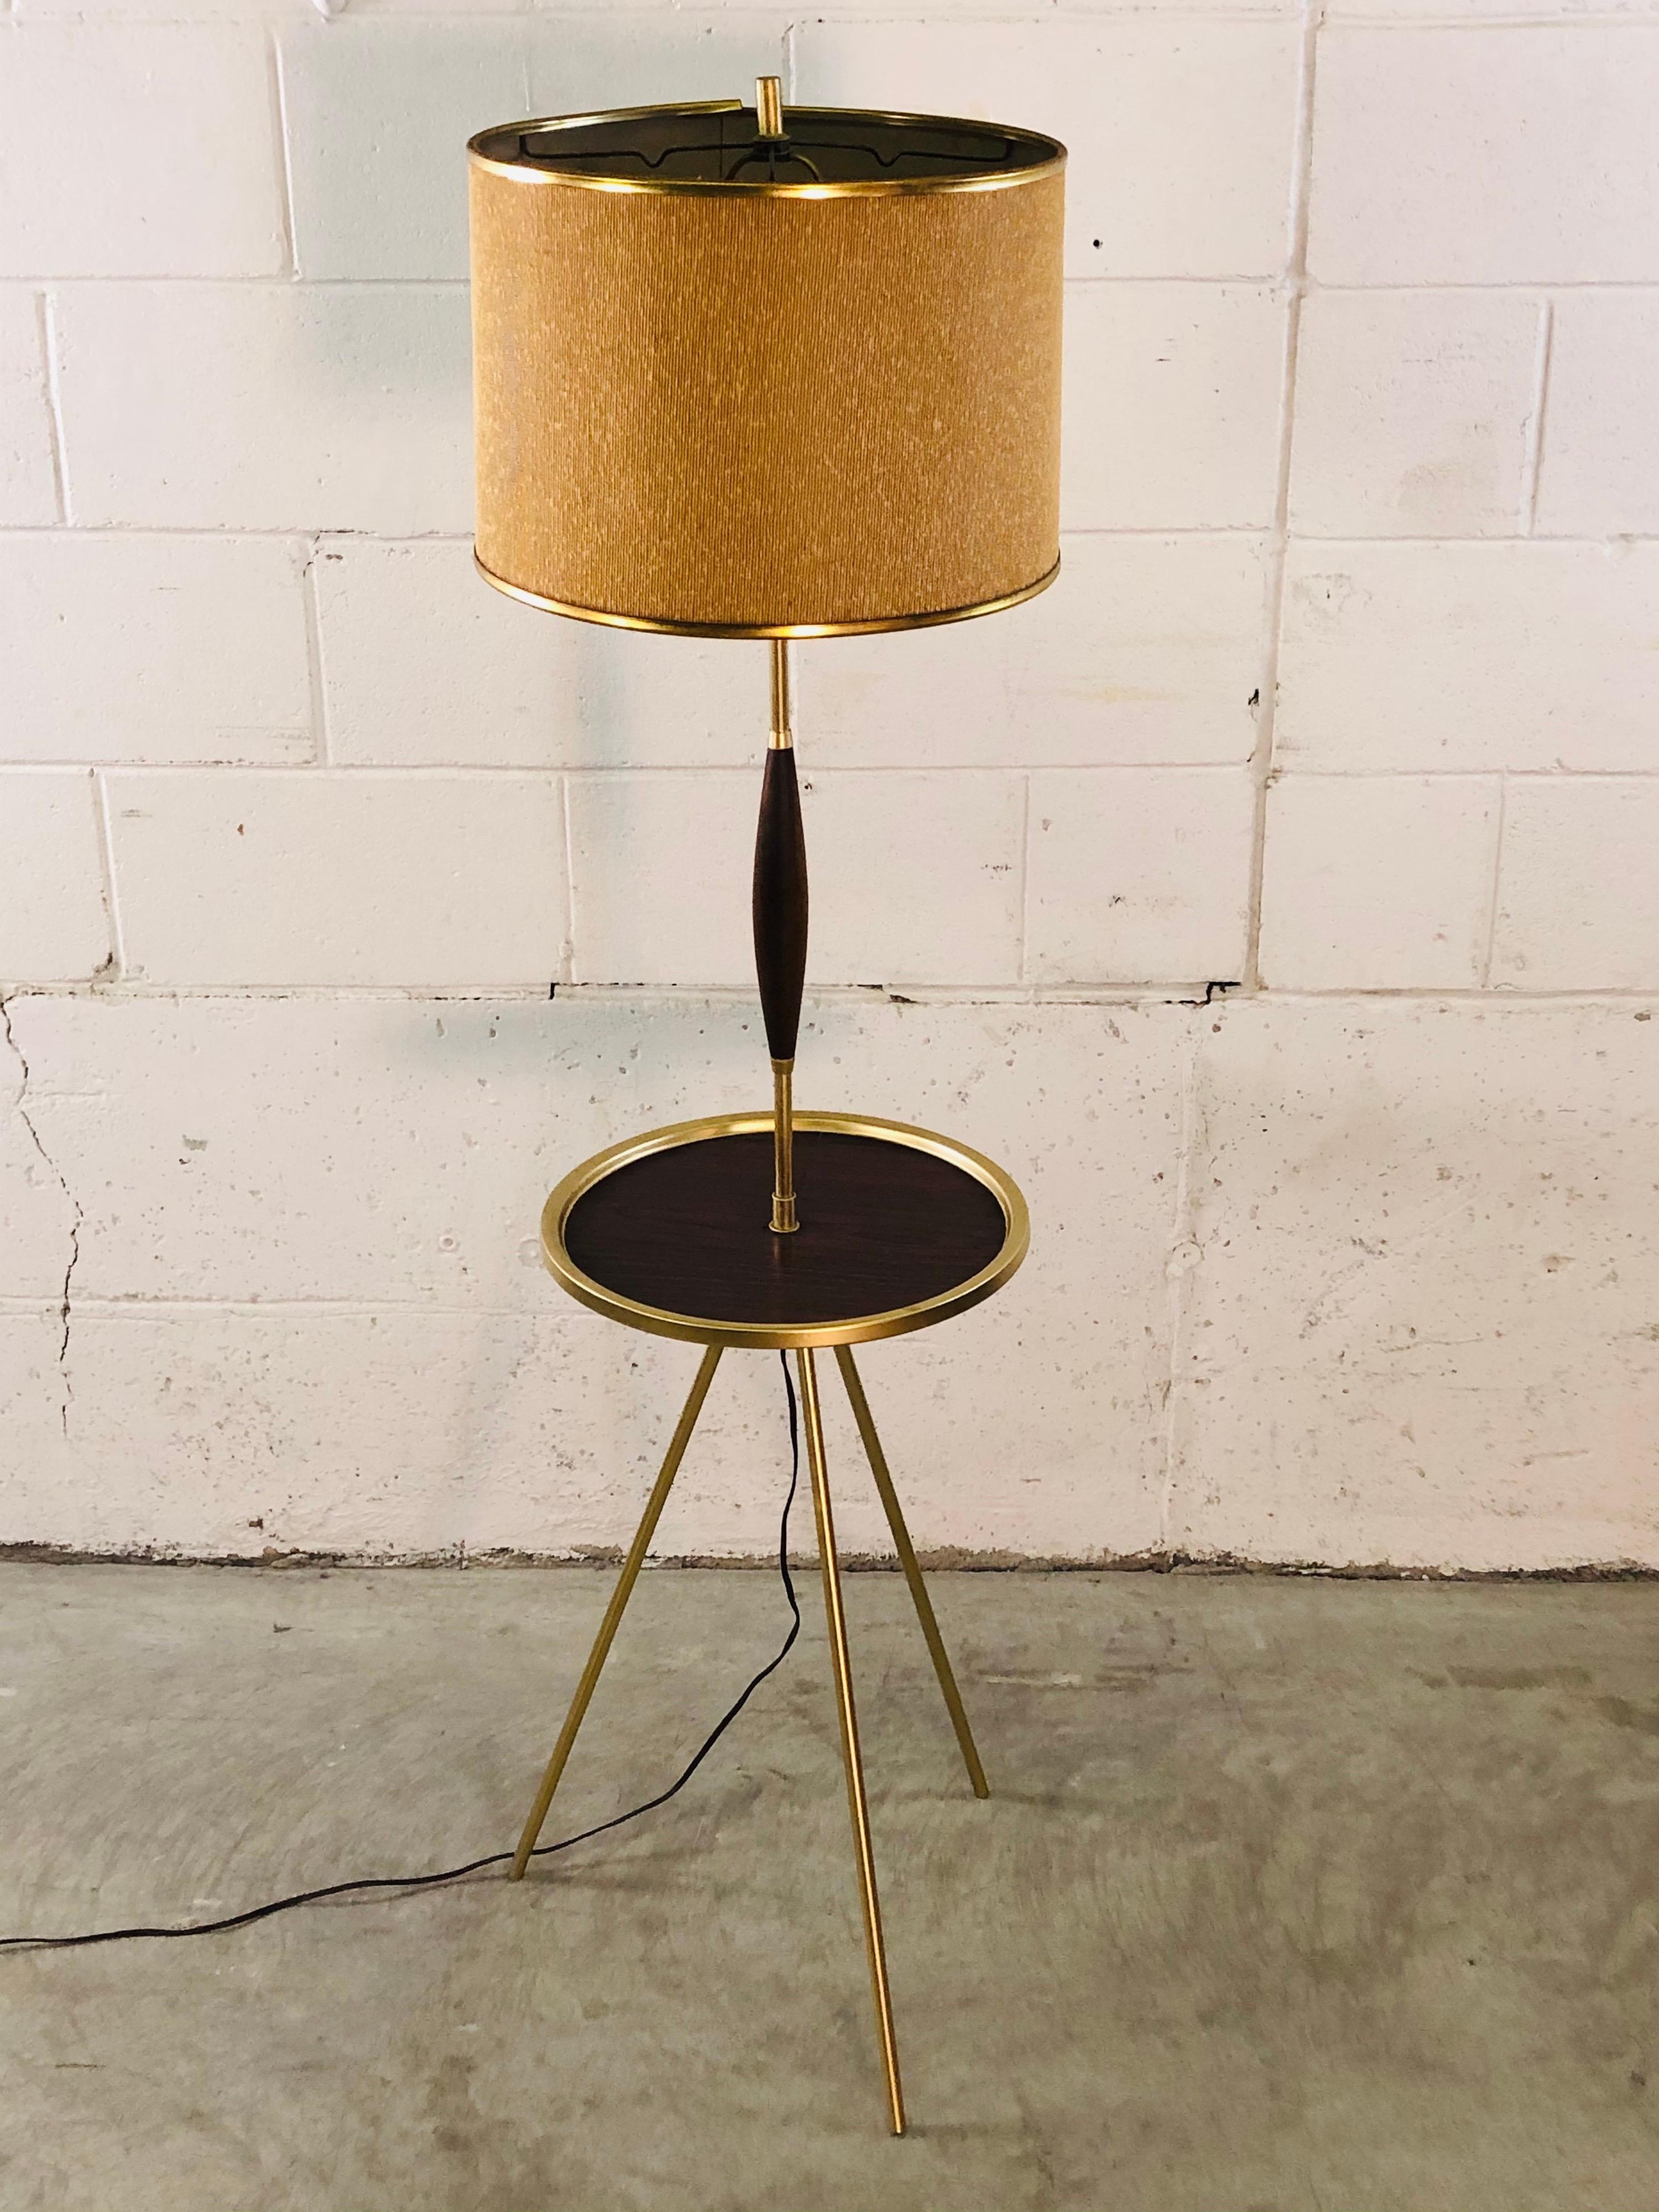 Vintage 1950s atomic style tripod floor lamp with original shade. The lamp has a faux-walnut and brass round tray table. The shade measures: 14.5” diameter x 10” height. The lamp has been newly refinished and is in working condition. No marks.